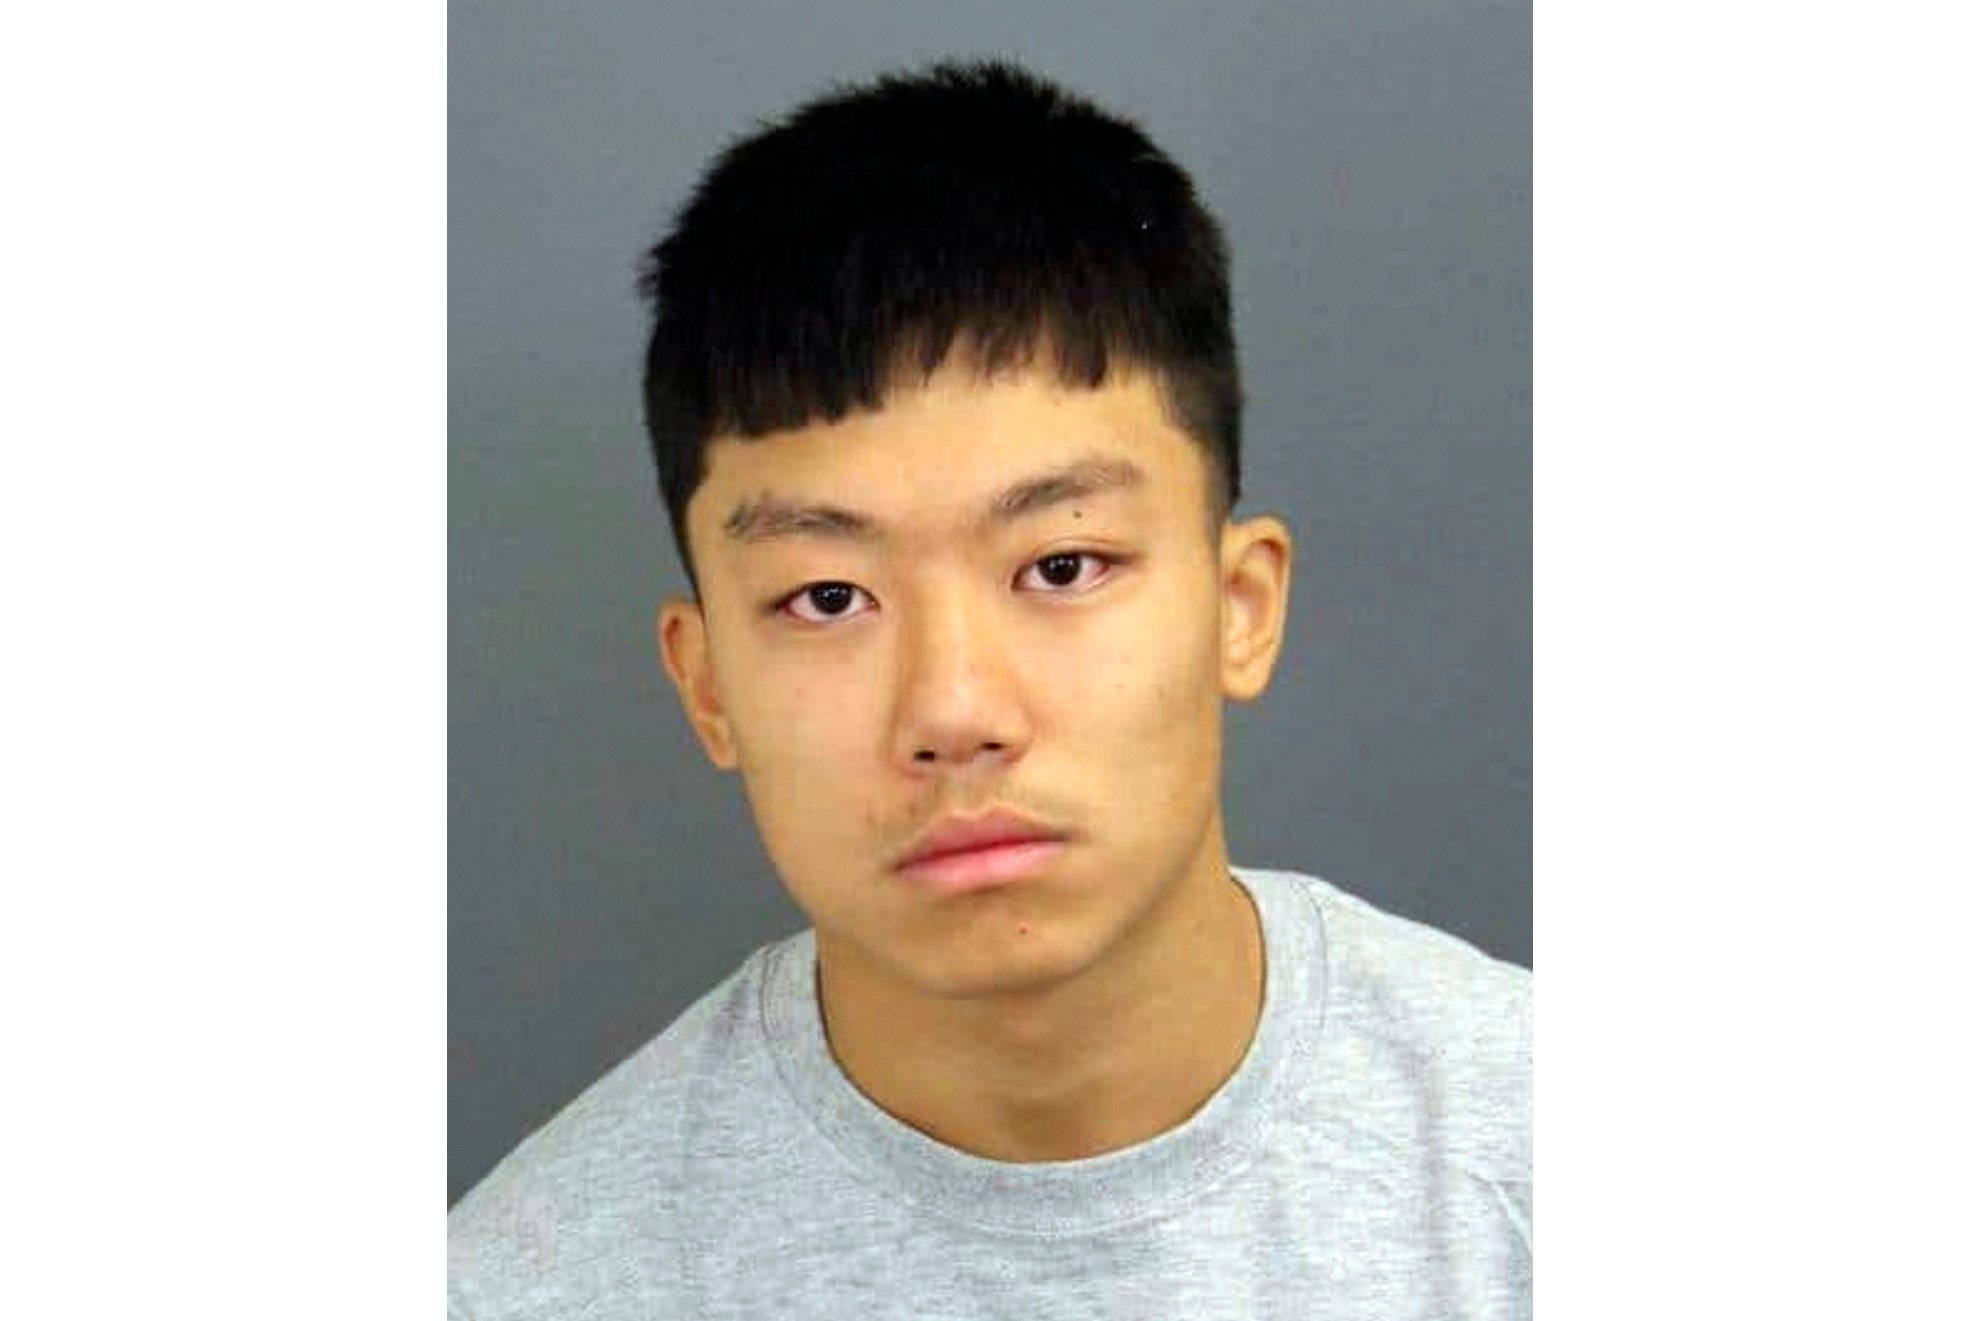 Kevin Bui is seen in a booking image. Photo: Denver District Attorney via AP

